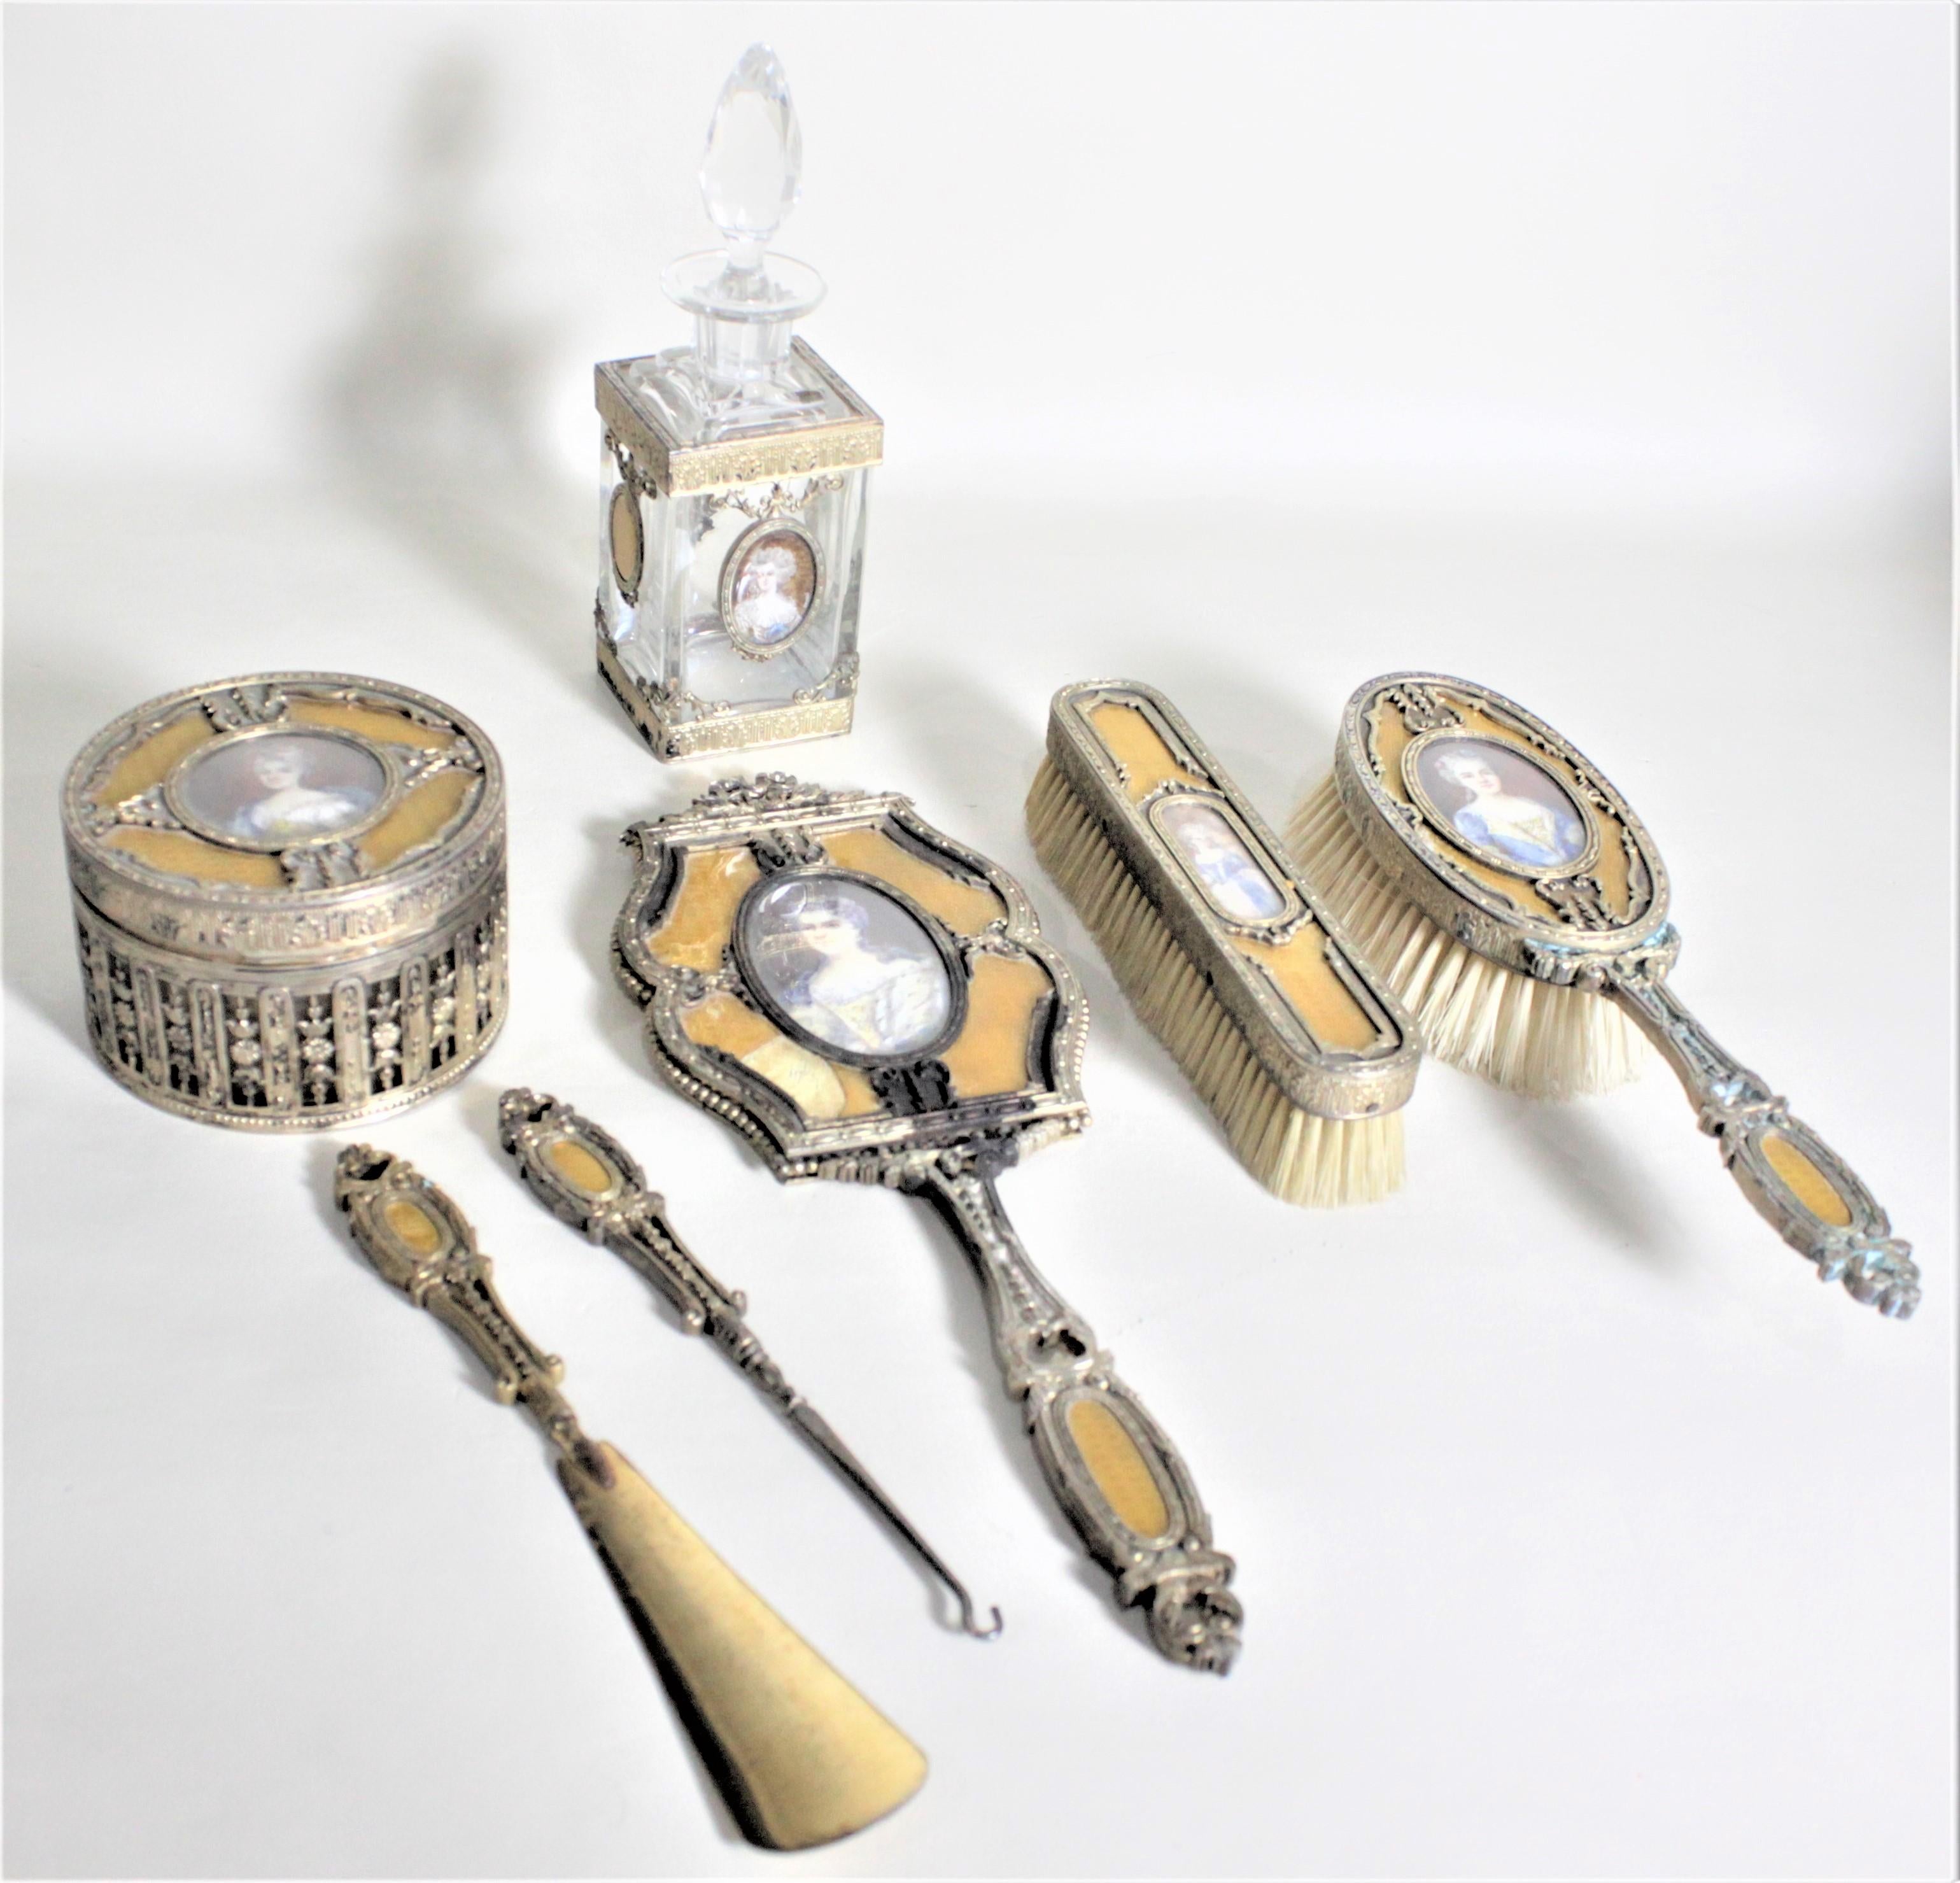 This antique ladies dresser set has no maker's marks but presumed to have been made in approximately 1900 in the 'Louis XVI' style. This seven piece set includes two brushes, a handled mirror, a dresser box, a scent or perfume bottle, and a shoe